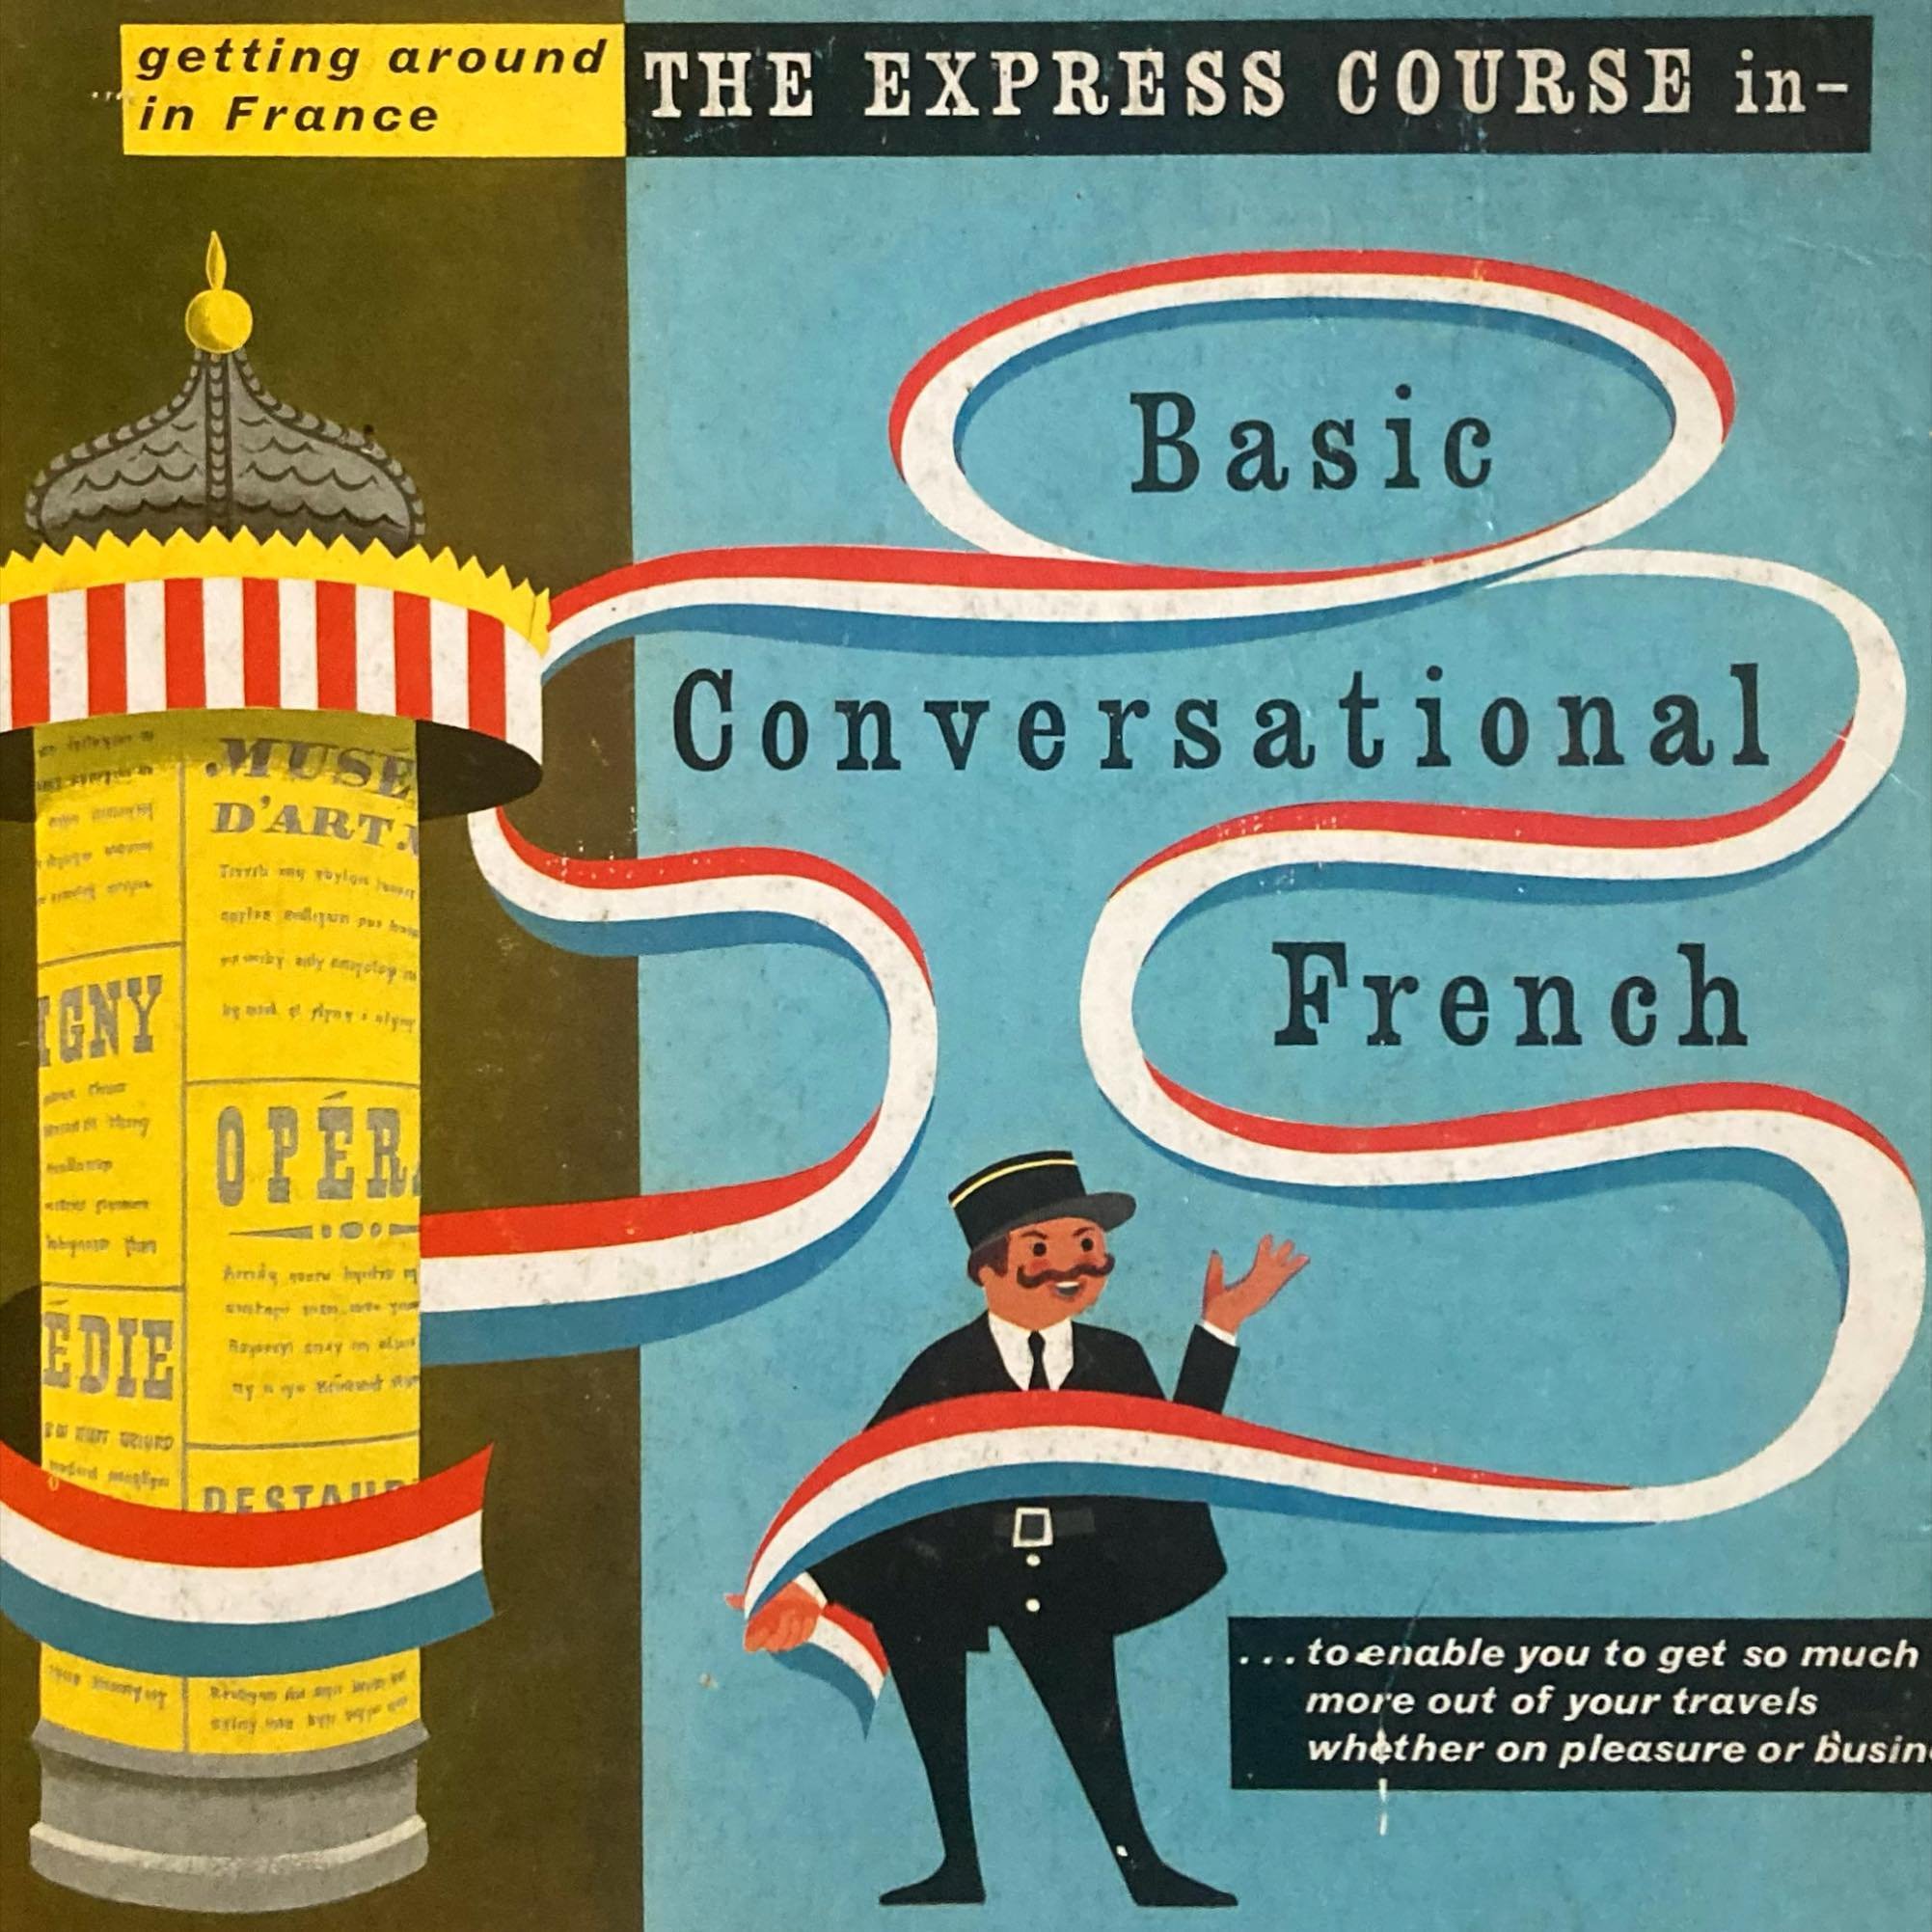 Bonjour! O&ugrave; est la boulangerie? 

I love this LP cover. It&rsquo;s from a teach yourself French course from way back when. I wonder who the illustrator is?